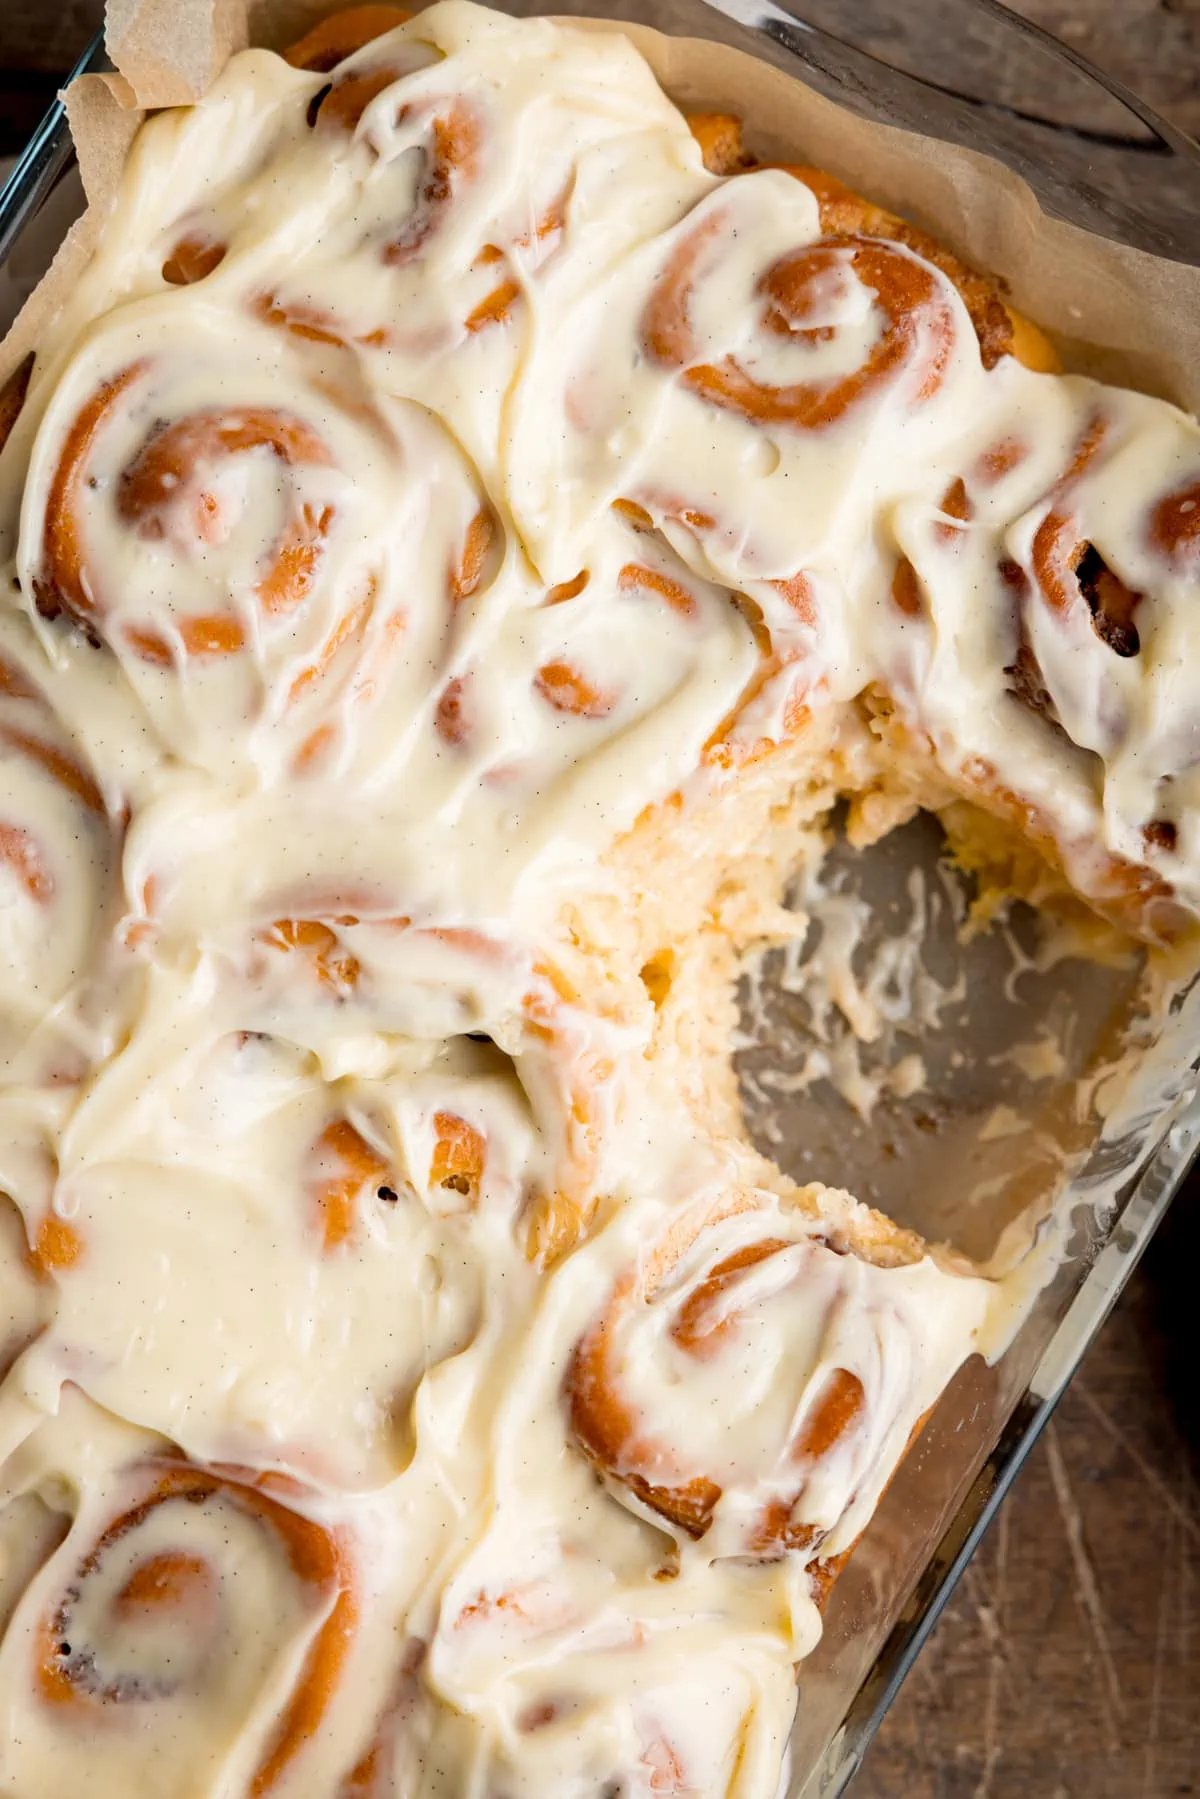 Overhead image of a baking dish filled with cinnamon rolls, topped with cream cheese frosting. One cinnamon roll has been removed.